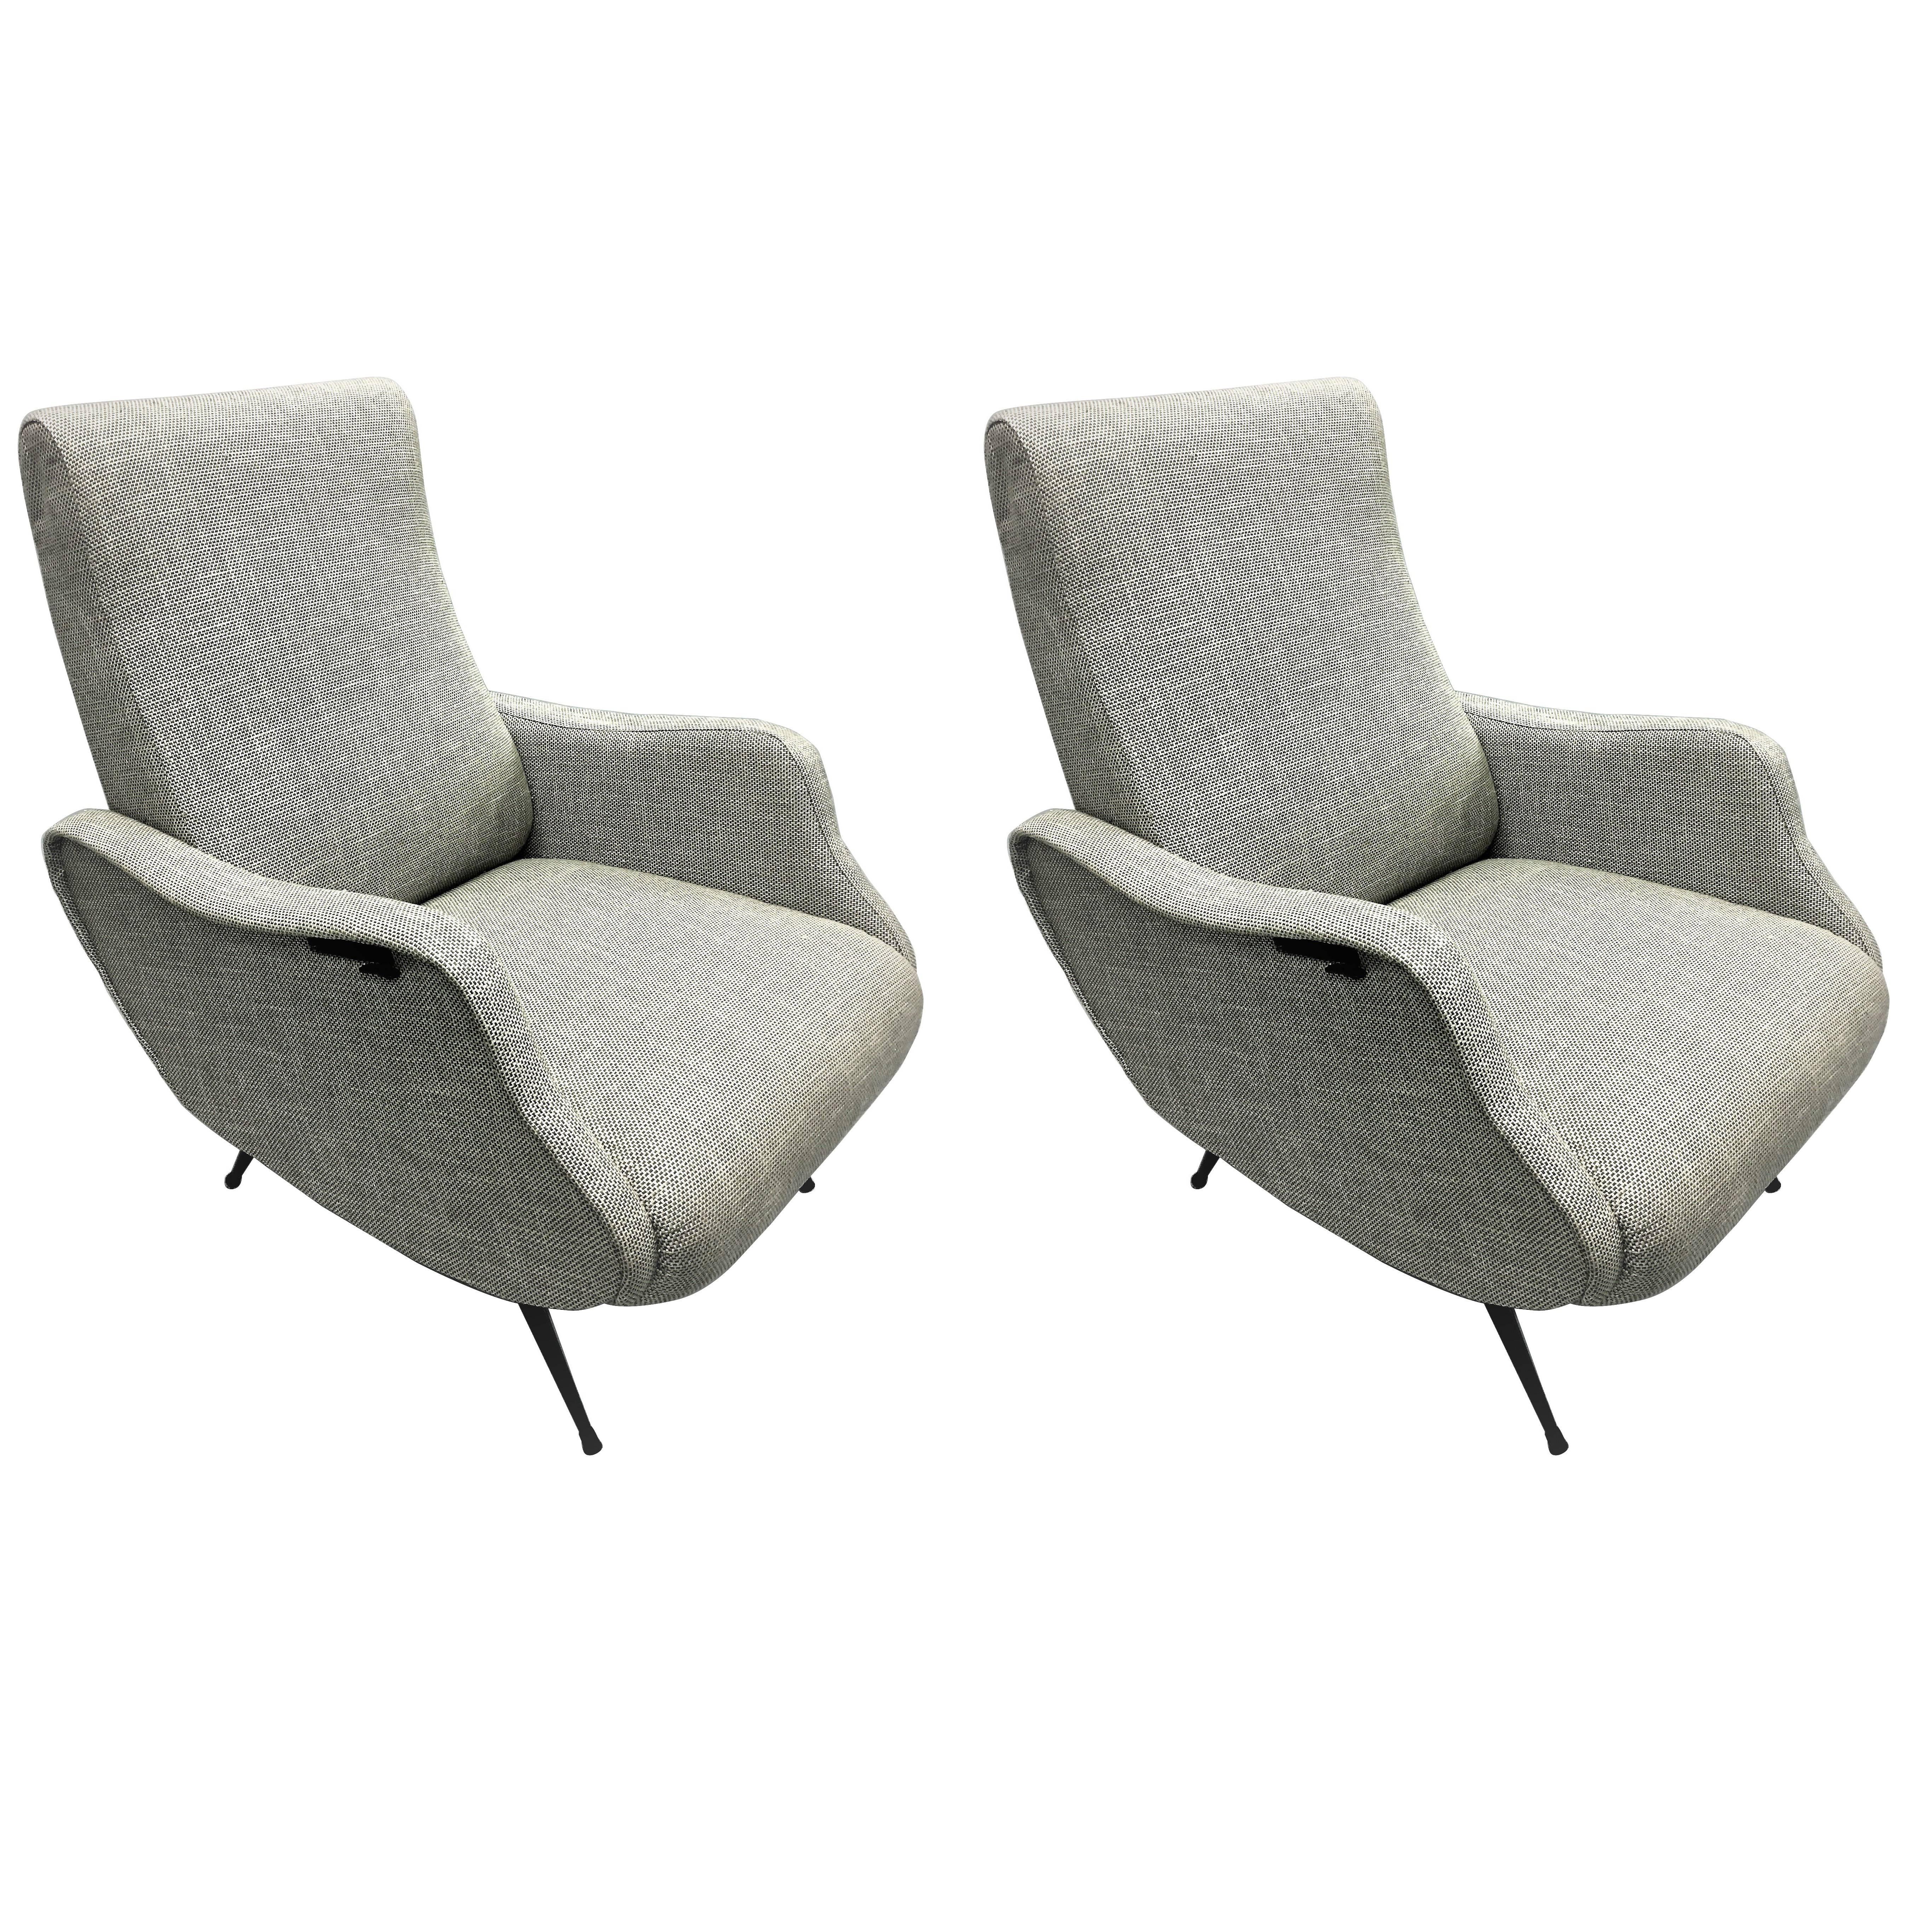 Elegant pair of Italian Mid-Century Modern reclining armchairs in the style of Marco Zanuso's Lady chairs, 1950. The pieces have generous size, recline and are very comfortable; they feature exquisite lines and detailing and have black lacquered